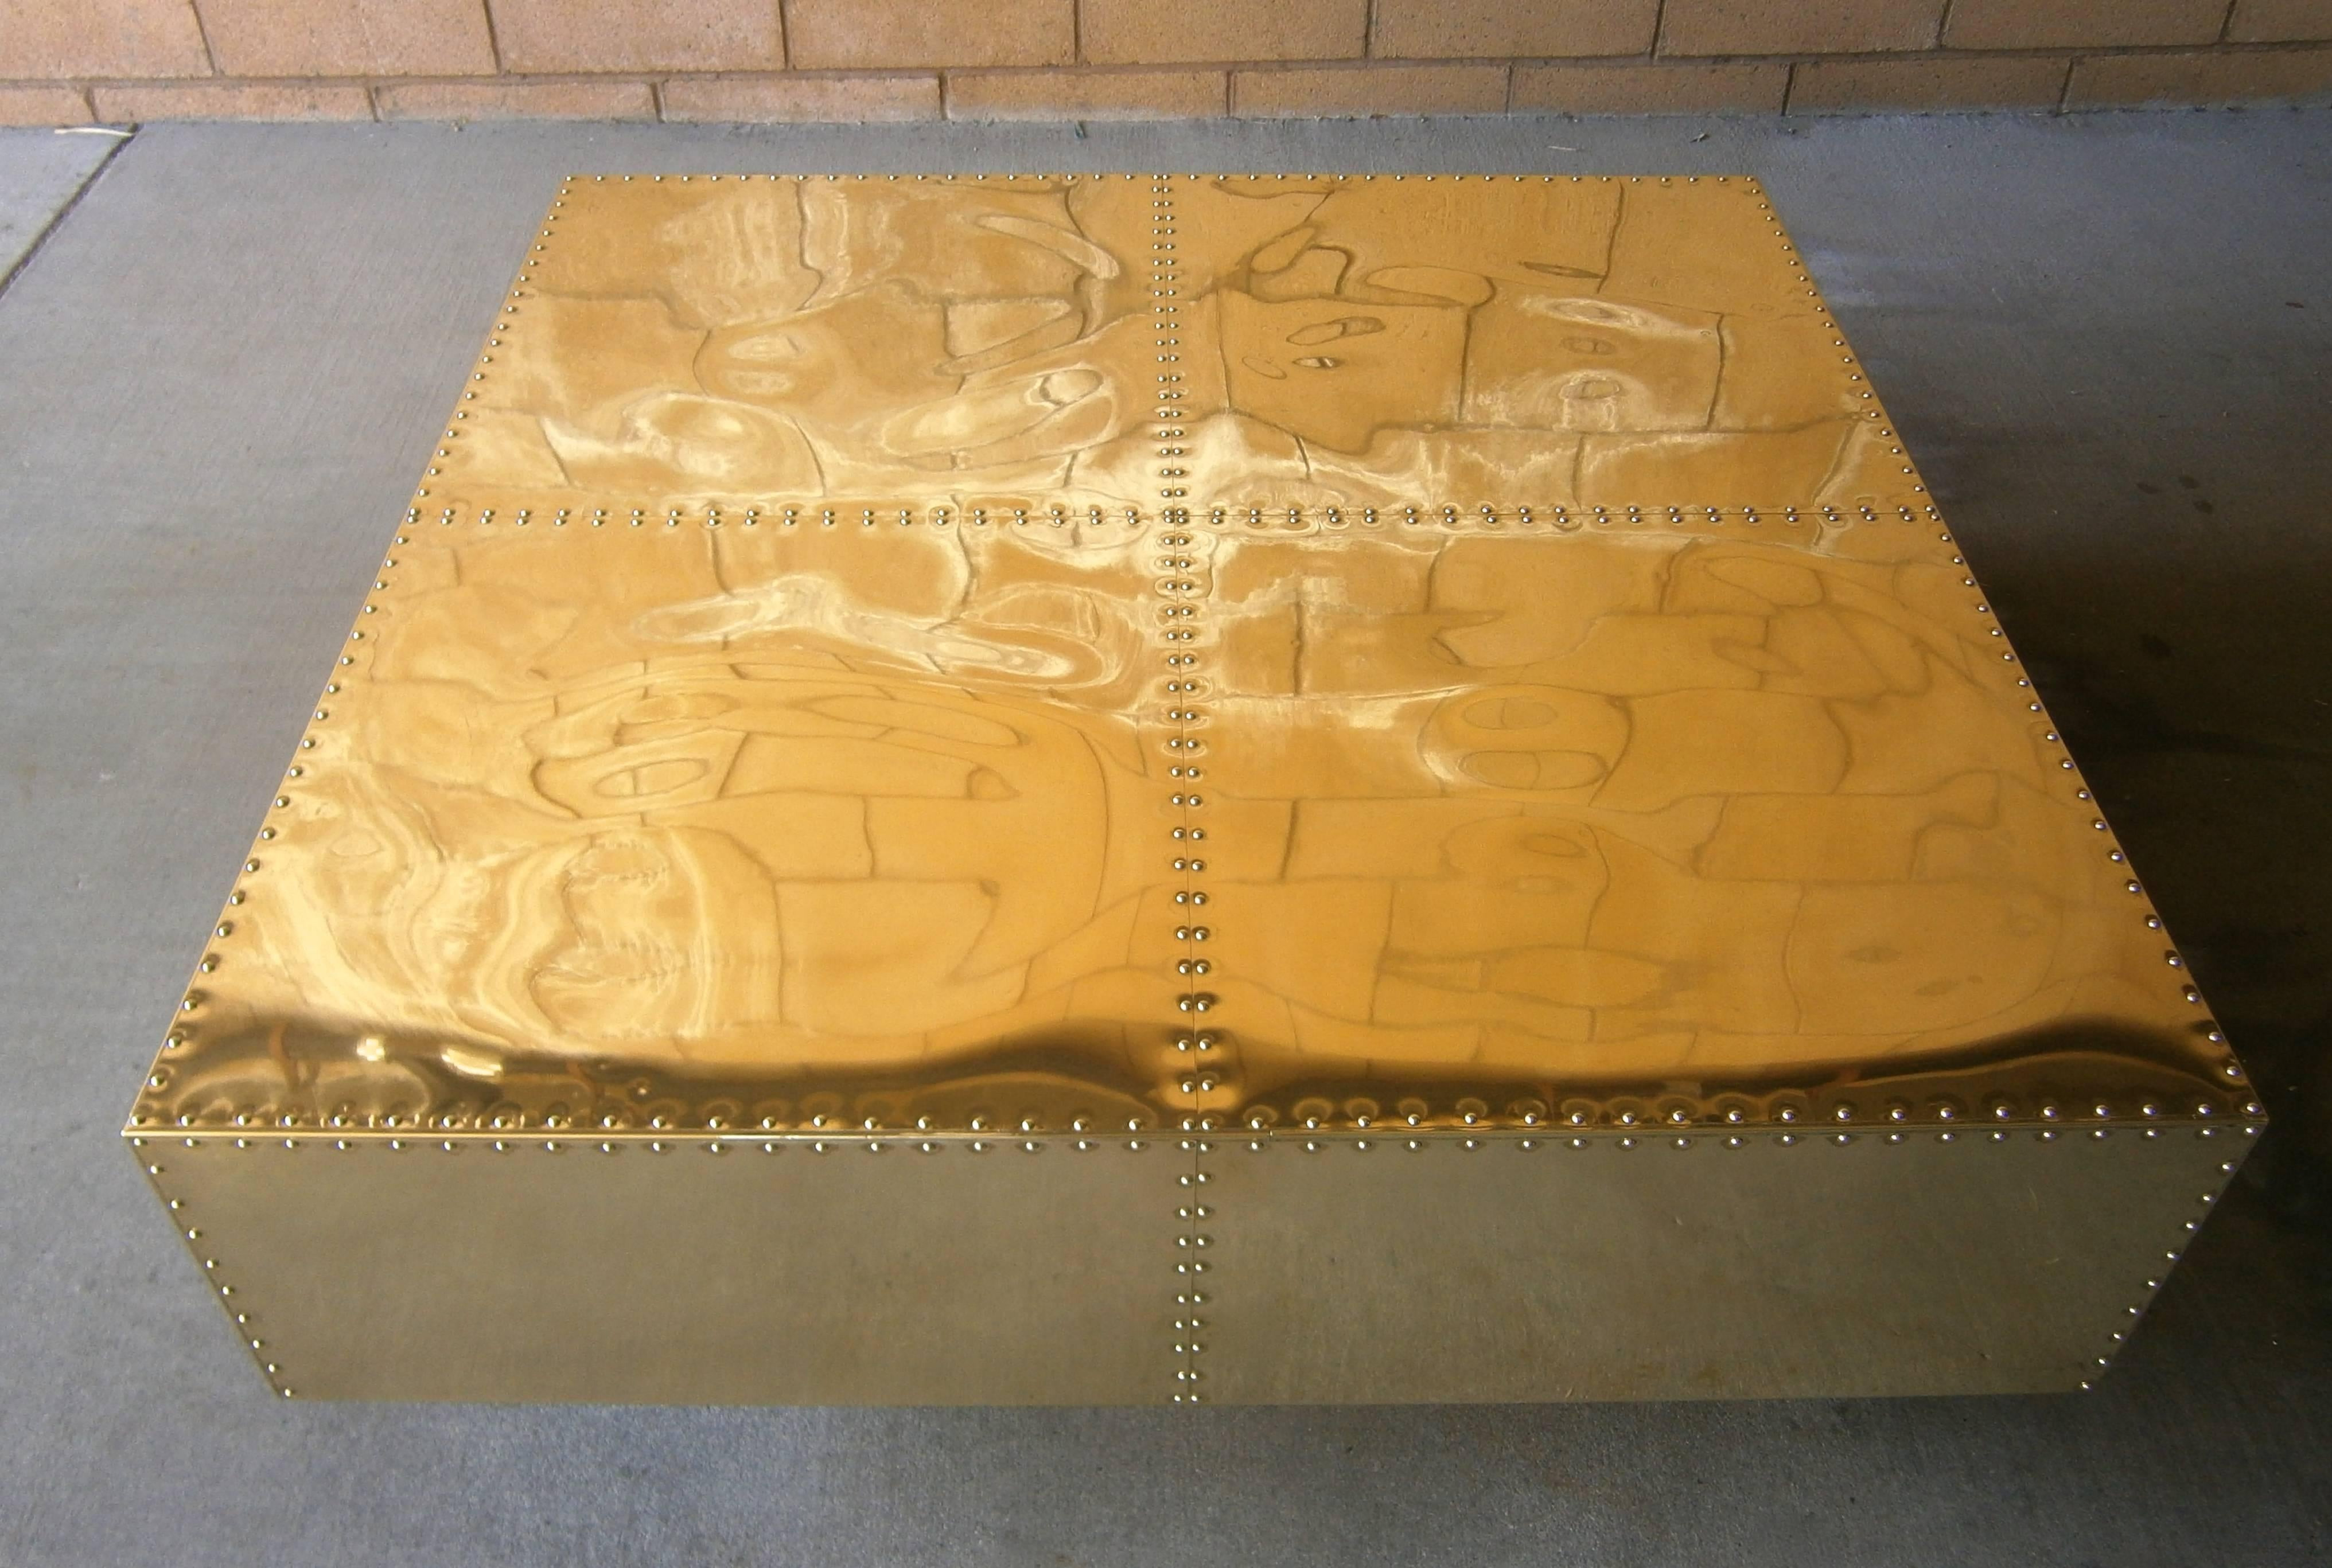 A gleaming brass-clad square coffee table made by the Spanish manufacturer Sarreid Ltd. in the 1970s.  The top is studded and separated into four segments and floats above a recessed plinth base. The table has recently been professionally polished